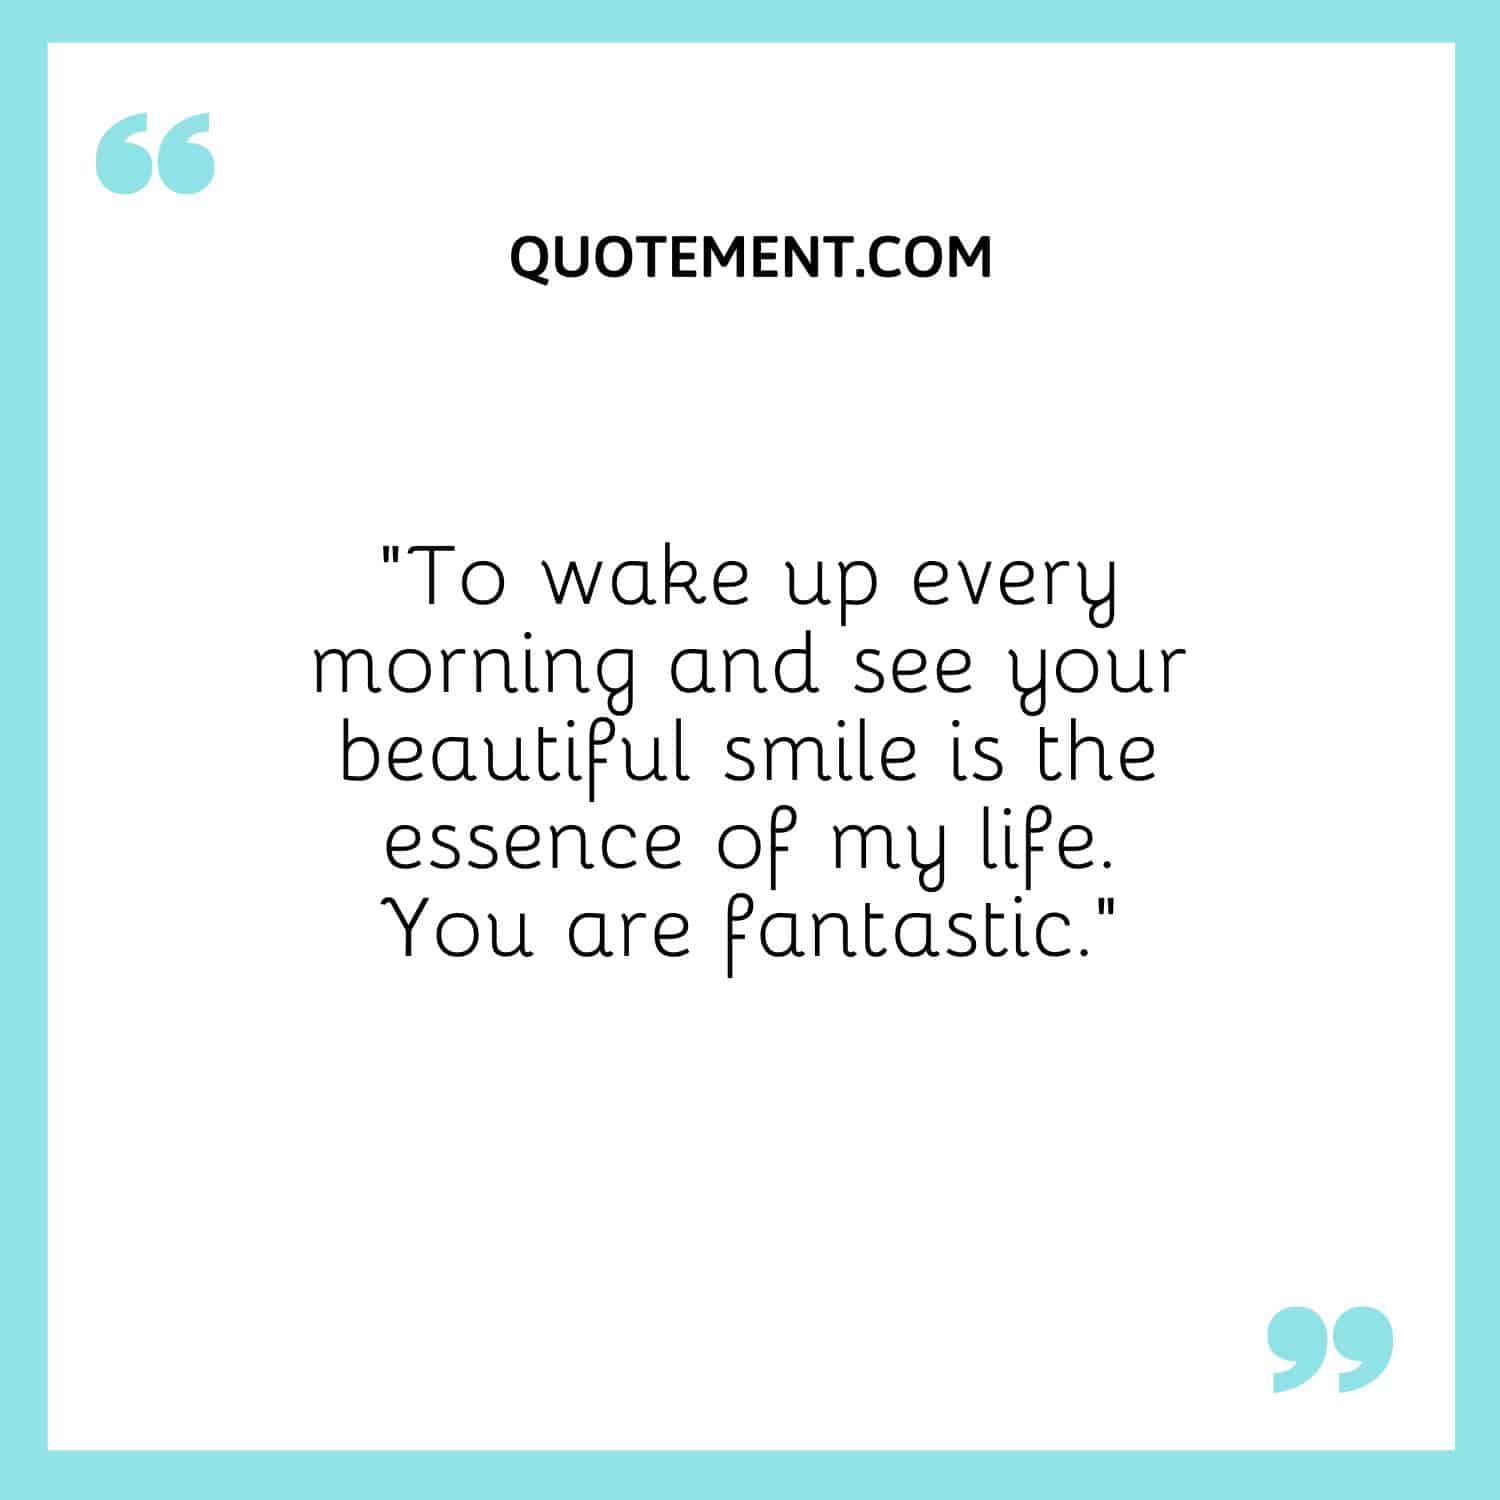 To wake up every morning and see your beautiful smile is the essence of my life